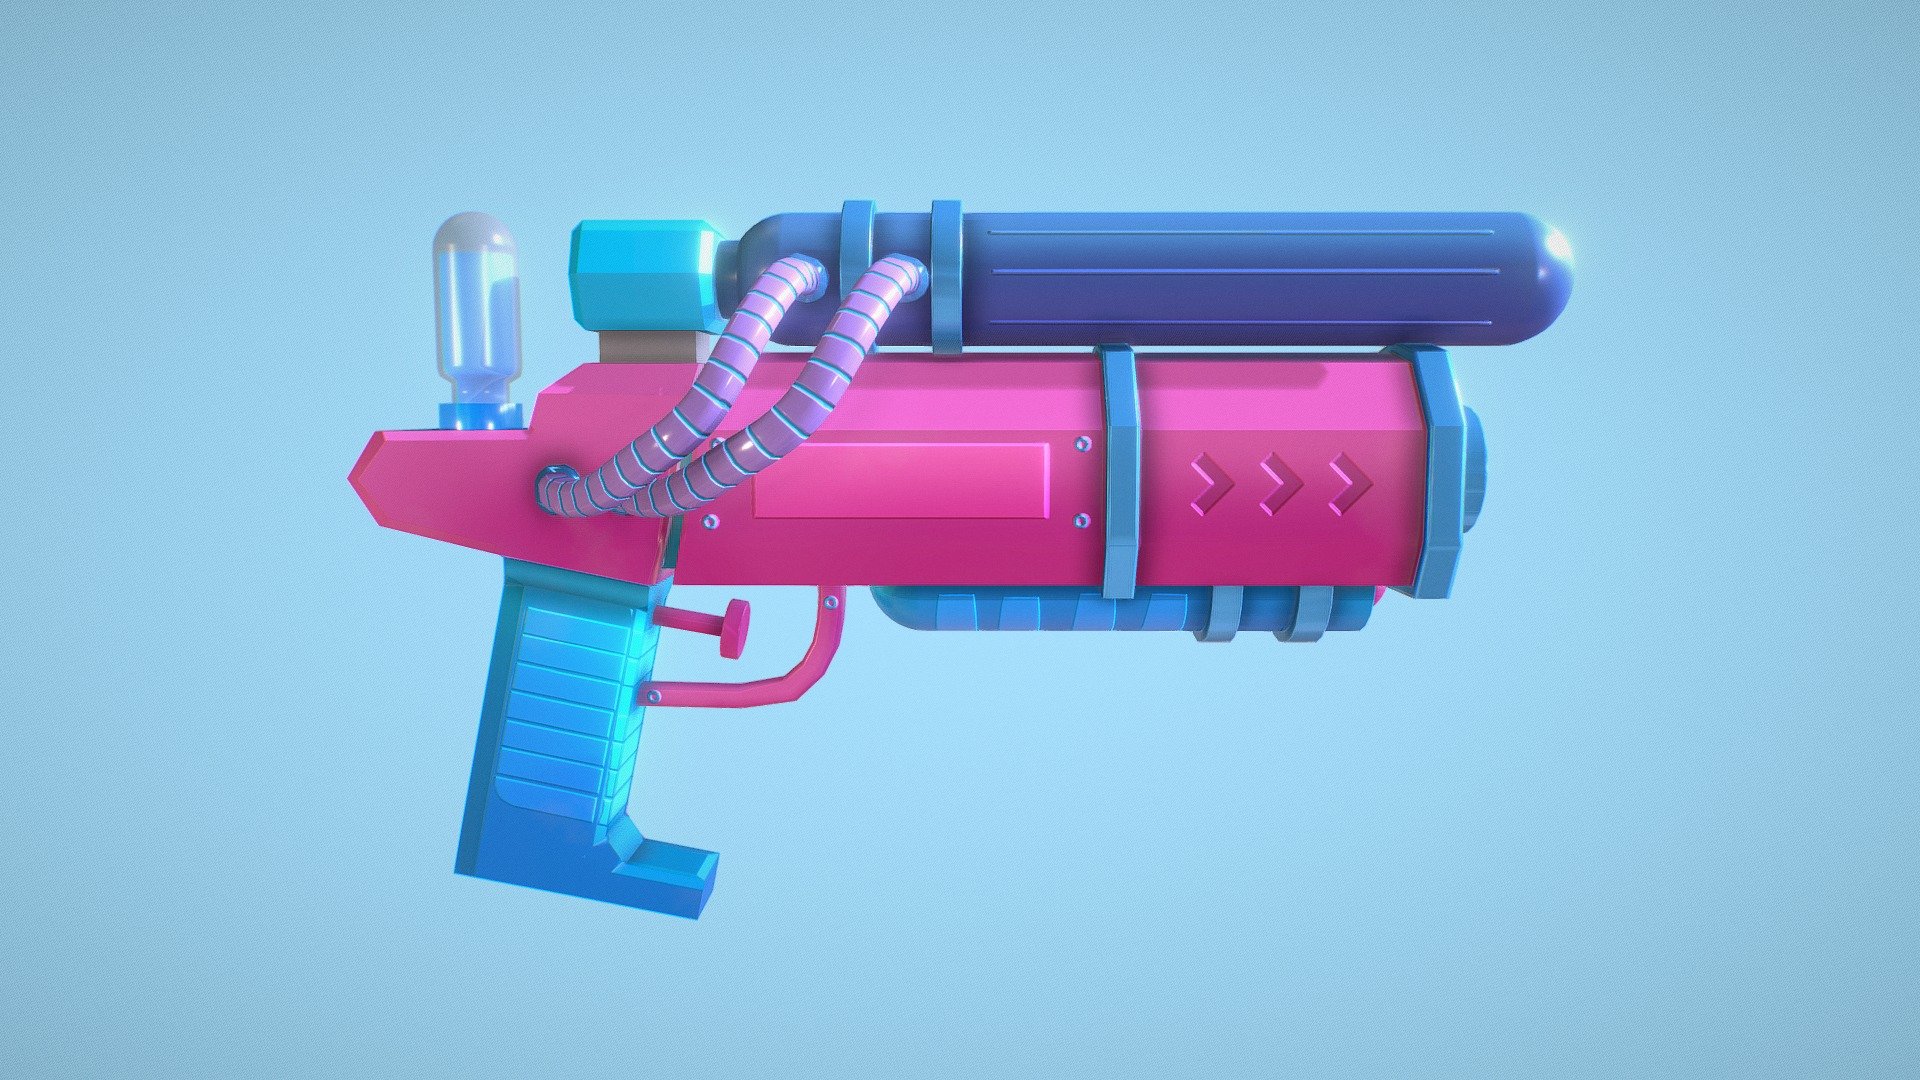 Water gun for a Rapid Game Prototype.
Modeled in Maya and textured in Substance Painter 3d model